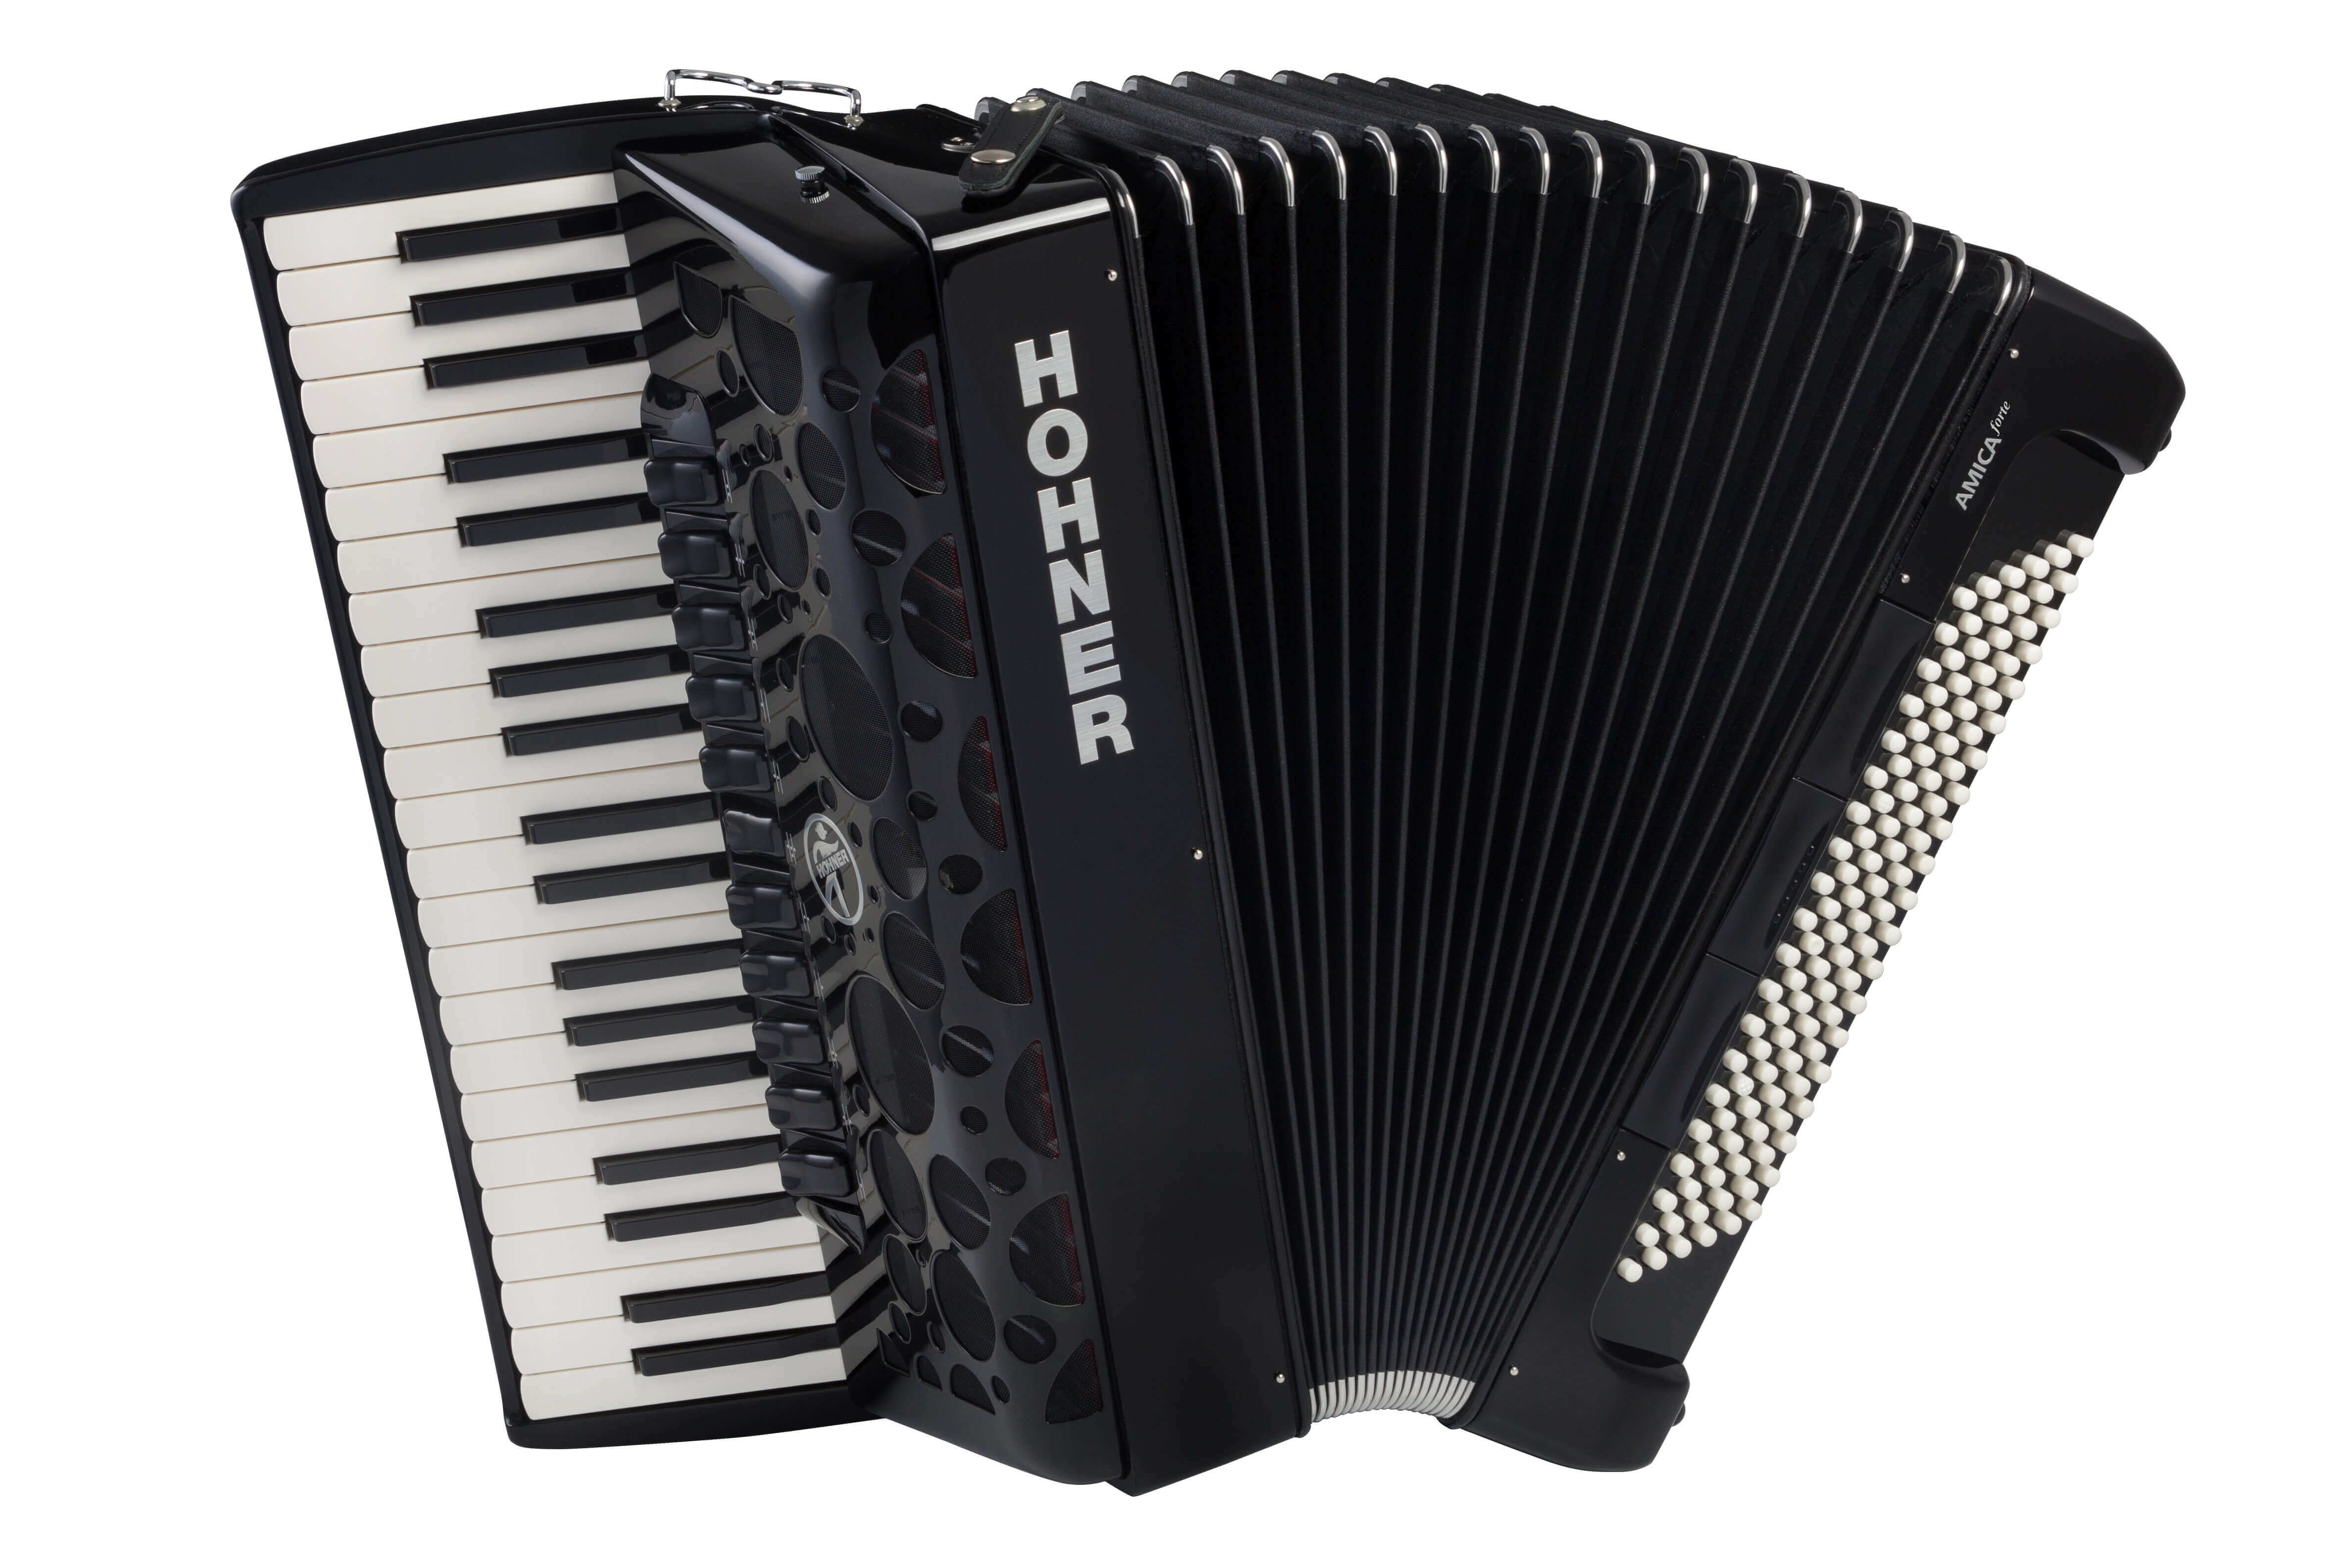 https://www.hohner.de/fileadmin/images/instruments/accordions/chromatic/amica-forte/amica-forte-iv-120/gallery/hohner-gal-amica-forte-120-01.jpg